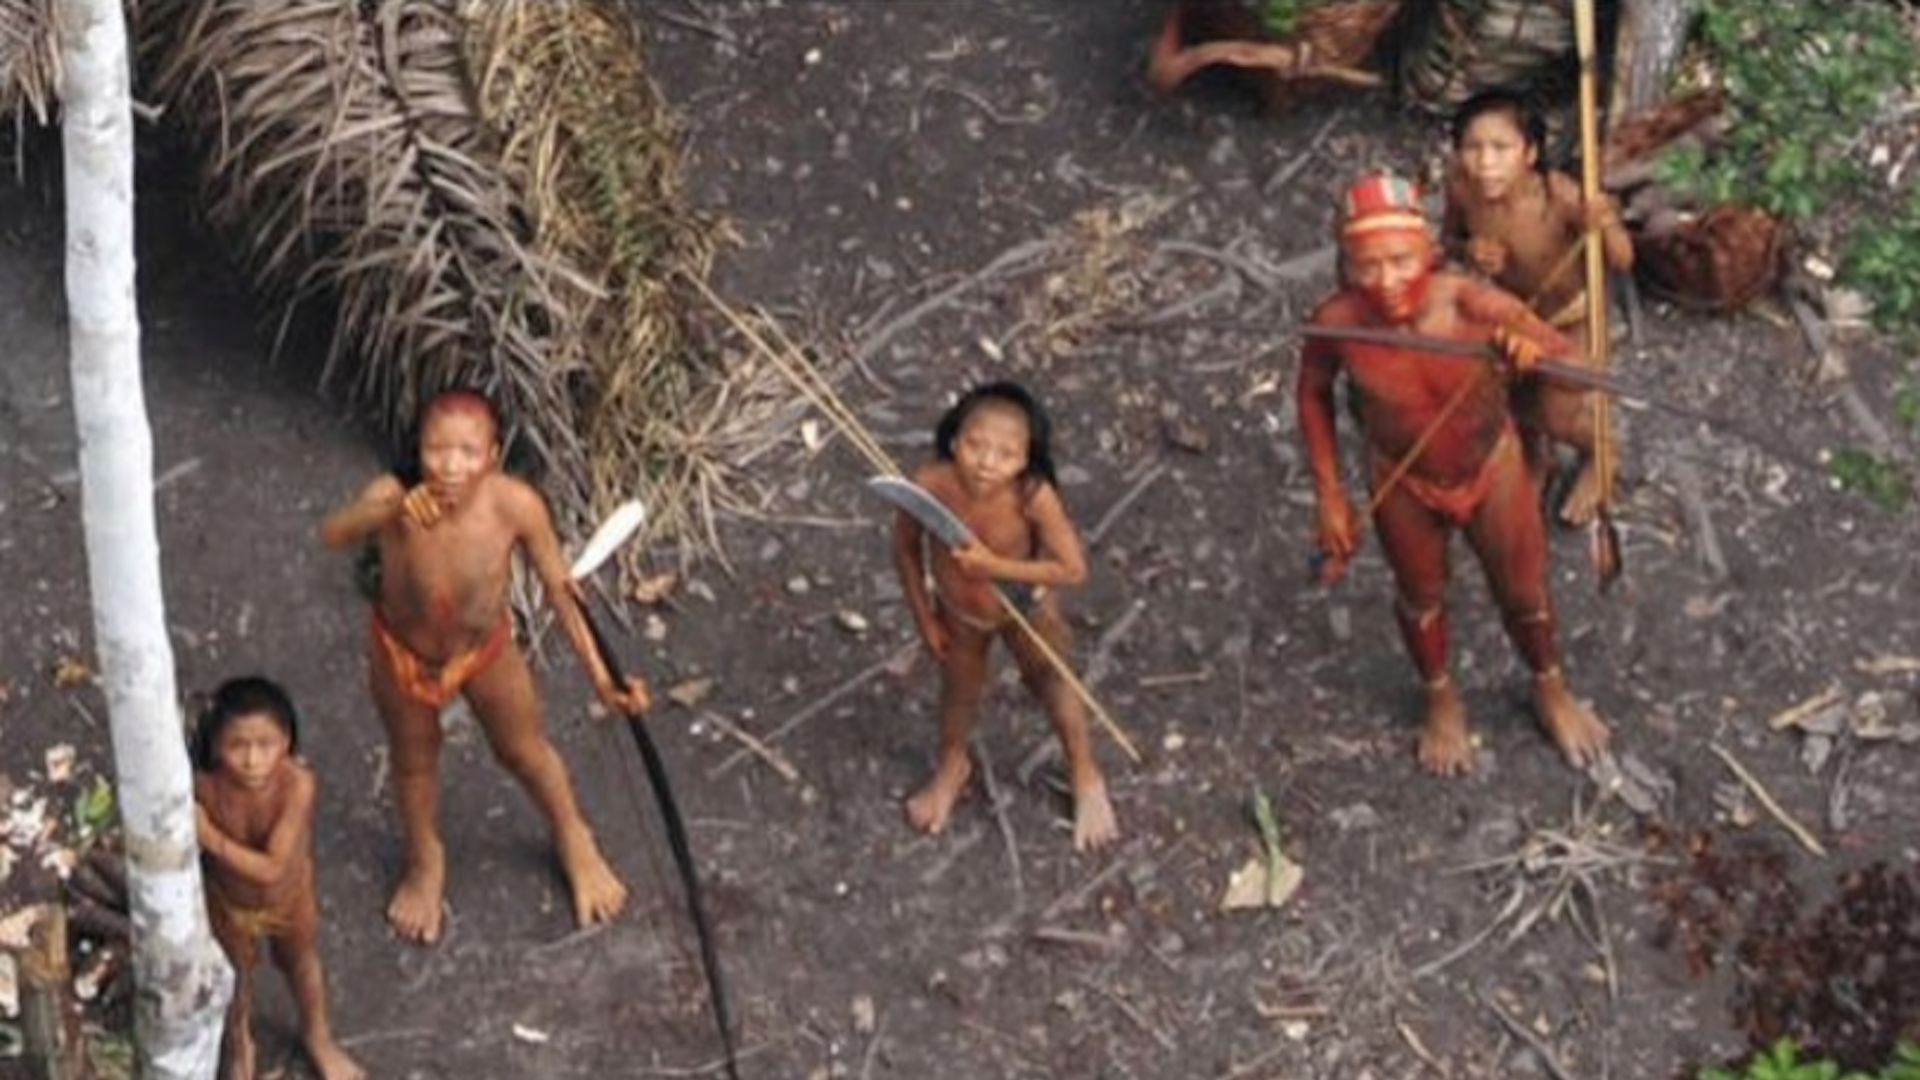 Members of an uncontacted tribe photographed in Brazil, 2012